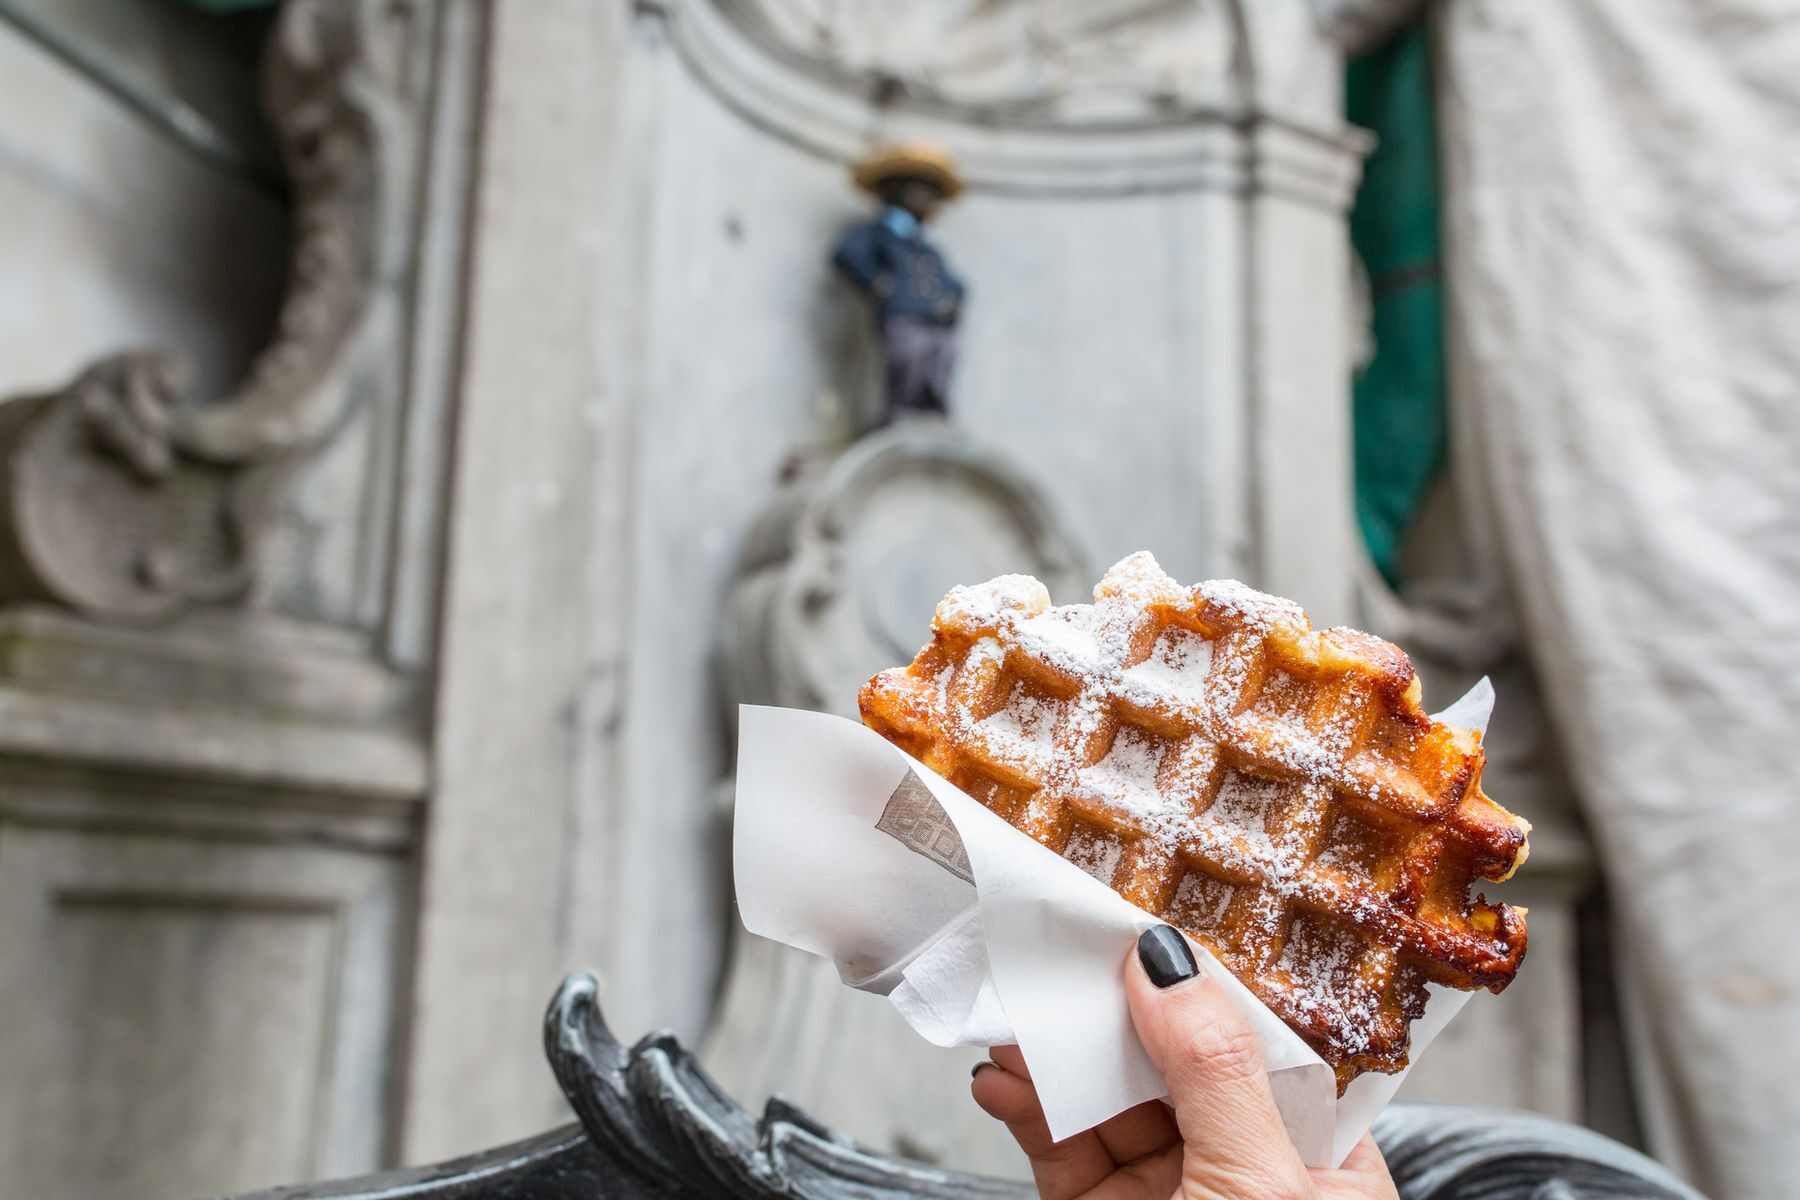 <p>Culinary tours, featuring itineraries designed around a destination’s gourmet attractions, are increasingly popular with epicureans. What better way to truly explore a region than through its street food? To whet your appetite (and maybe help plan your next getaway), here are the world’s 20 best street food cities.</p>